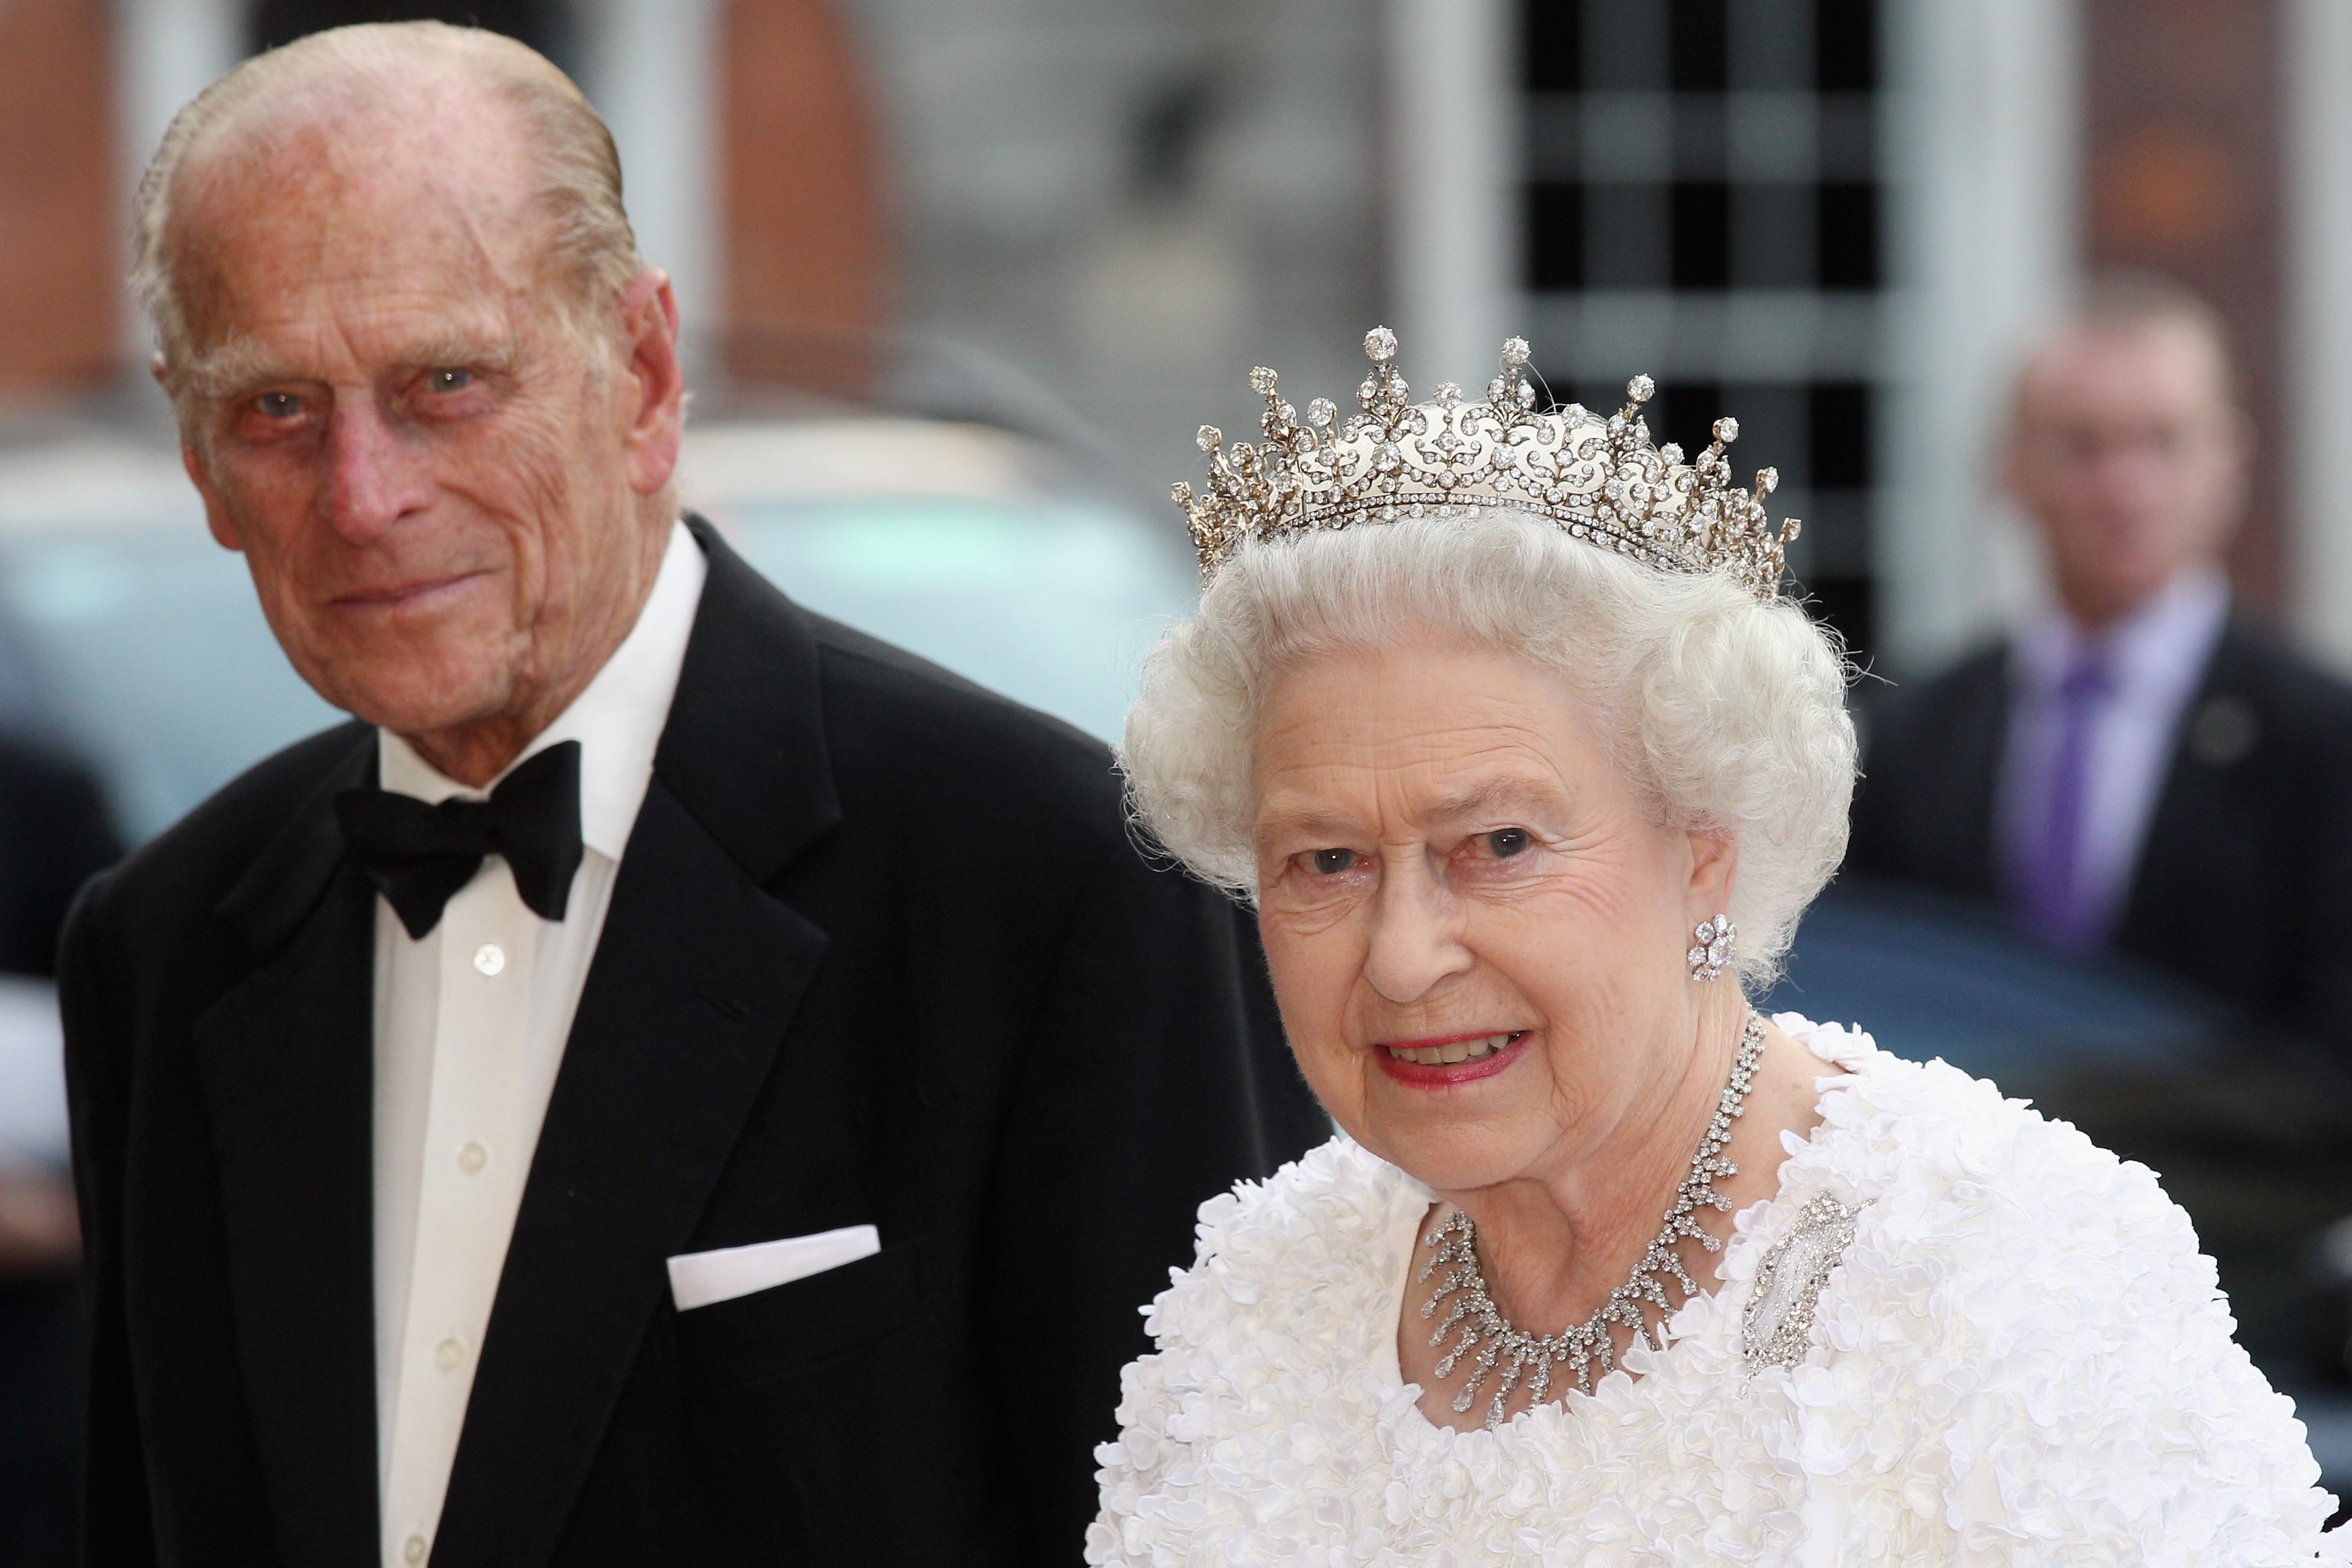 Queen Elizabeth II and Prince Philip, Duke of Edinburgh arrive to attend a State Banquet in Dublin Castle on May 18, 2011 in Dublin, Ireland | Source: Getty Images